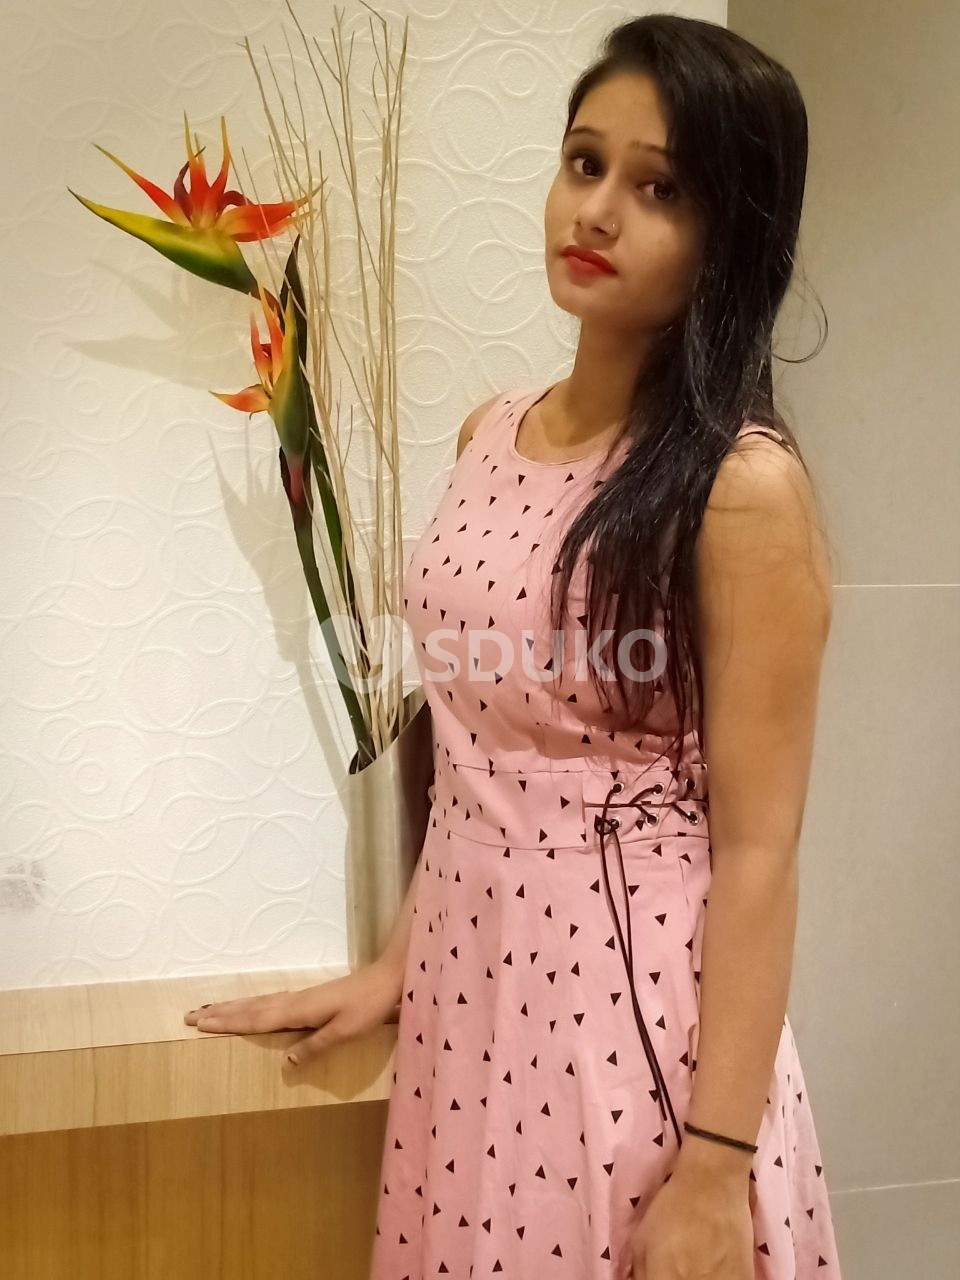 MIYAPUR AVAILABLE BEST HIGH PROFILE CALL GIRL INCALL OUTCALL SERVICE LOW RATE ....